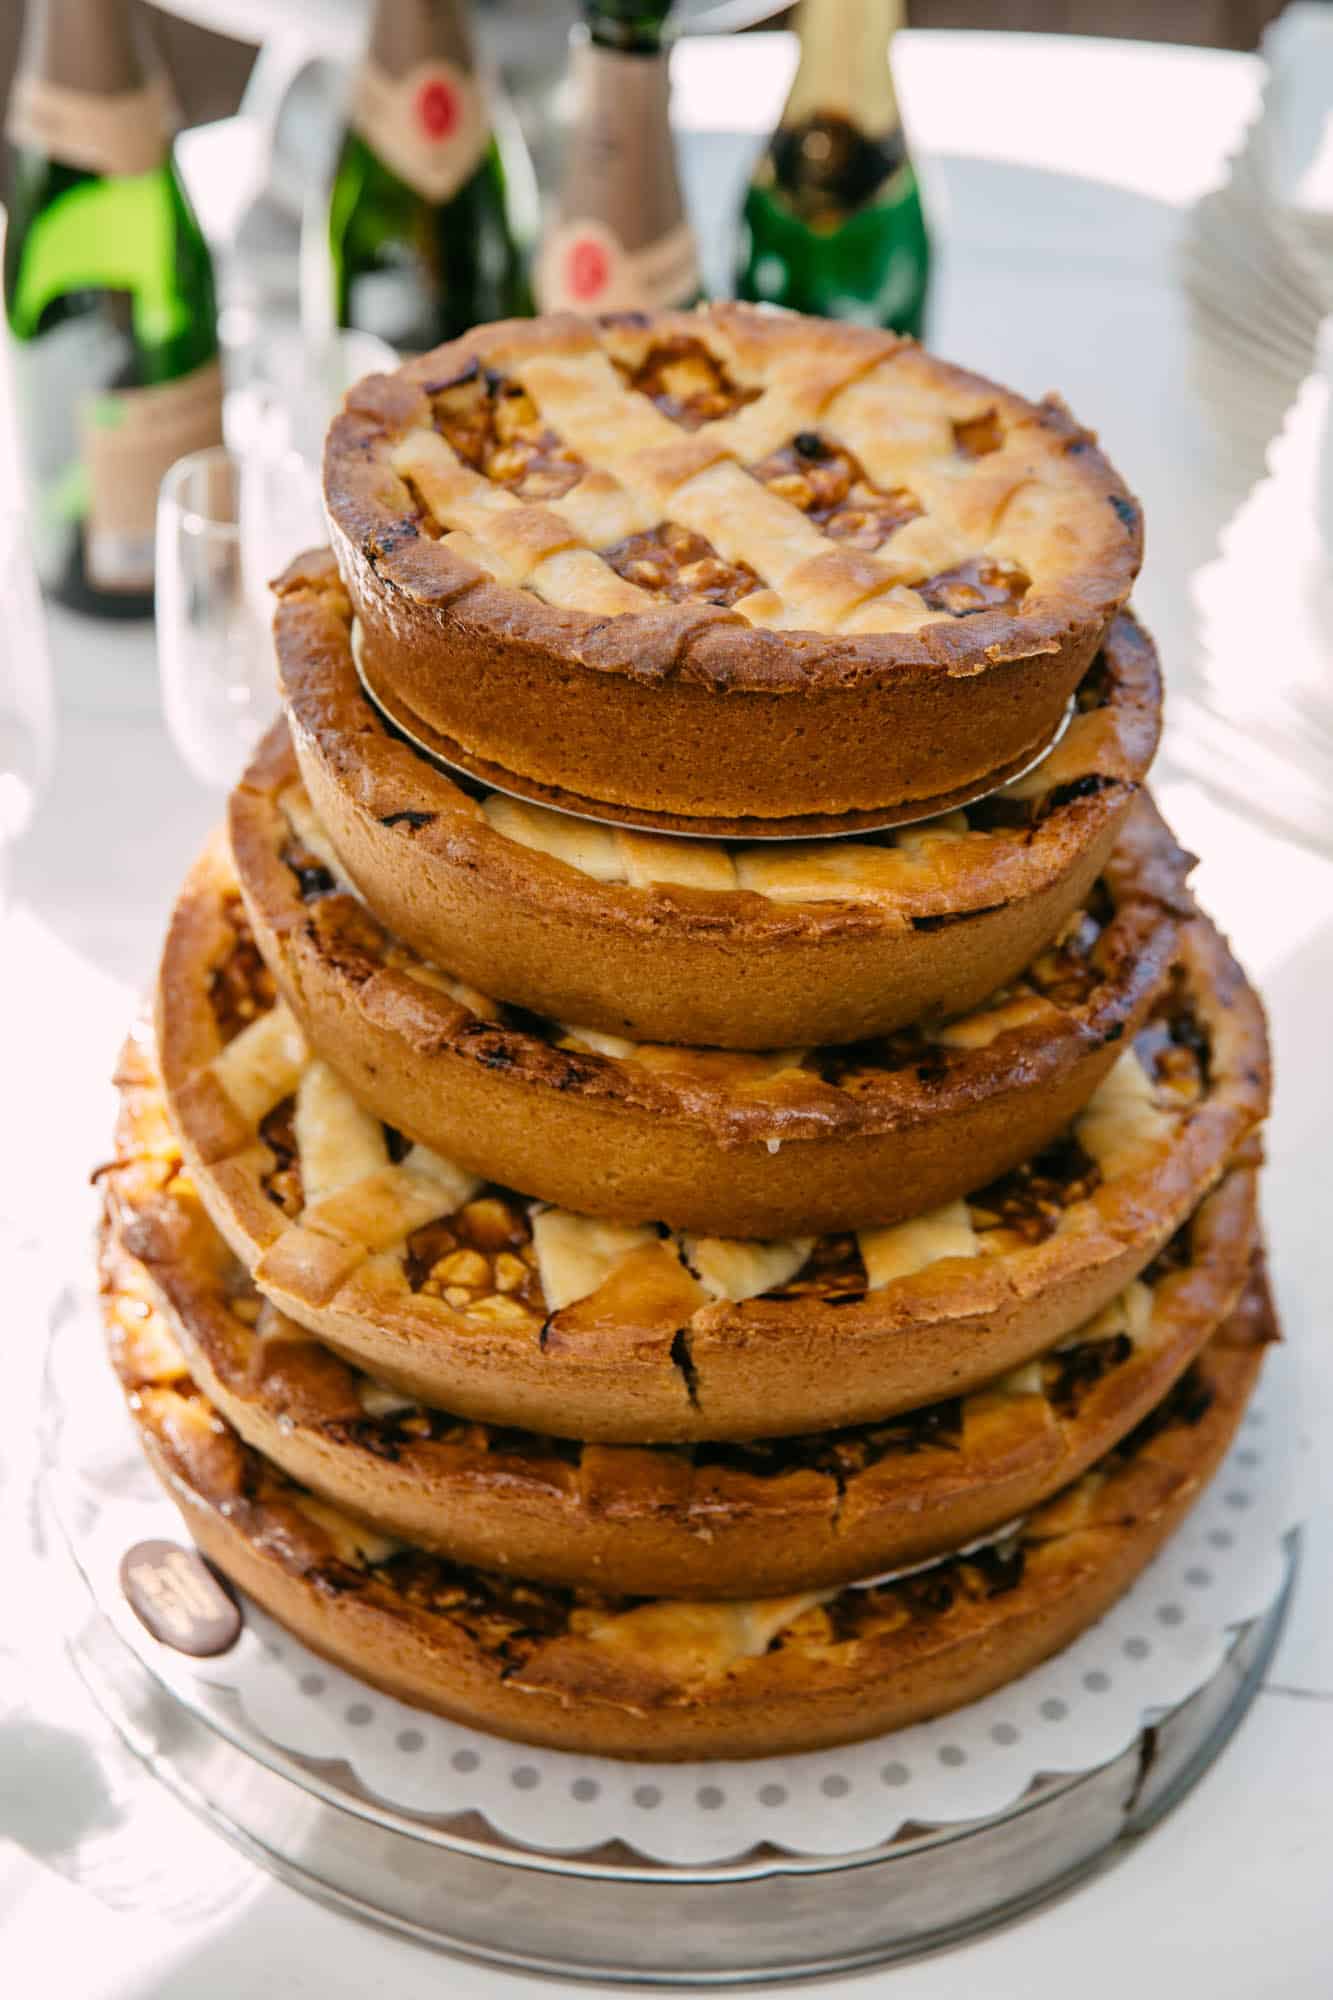 A stack of wedding cakes on a table.